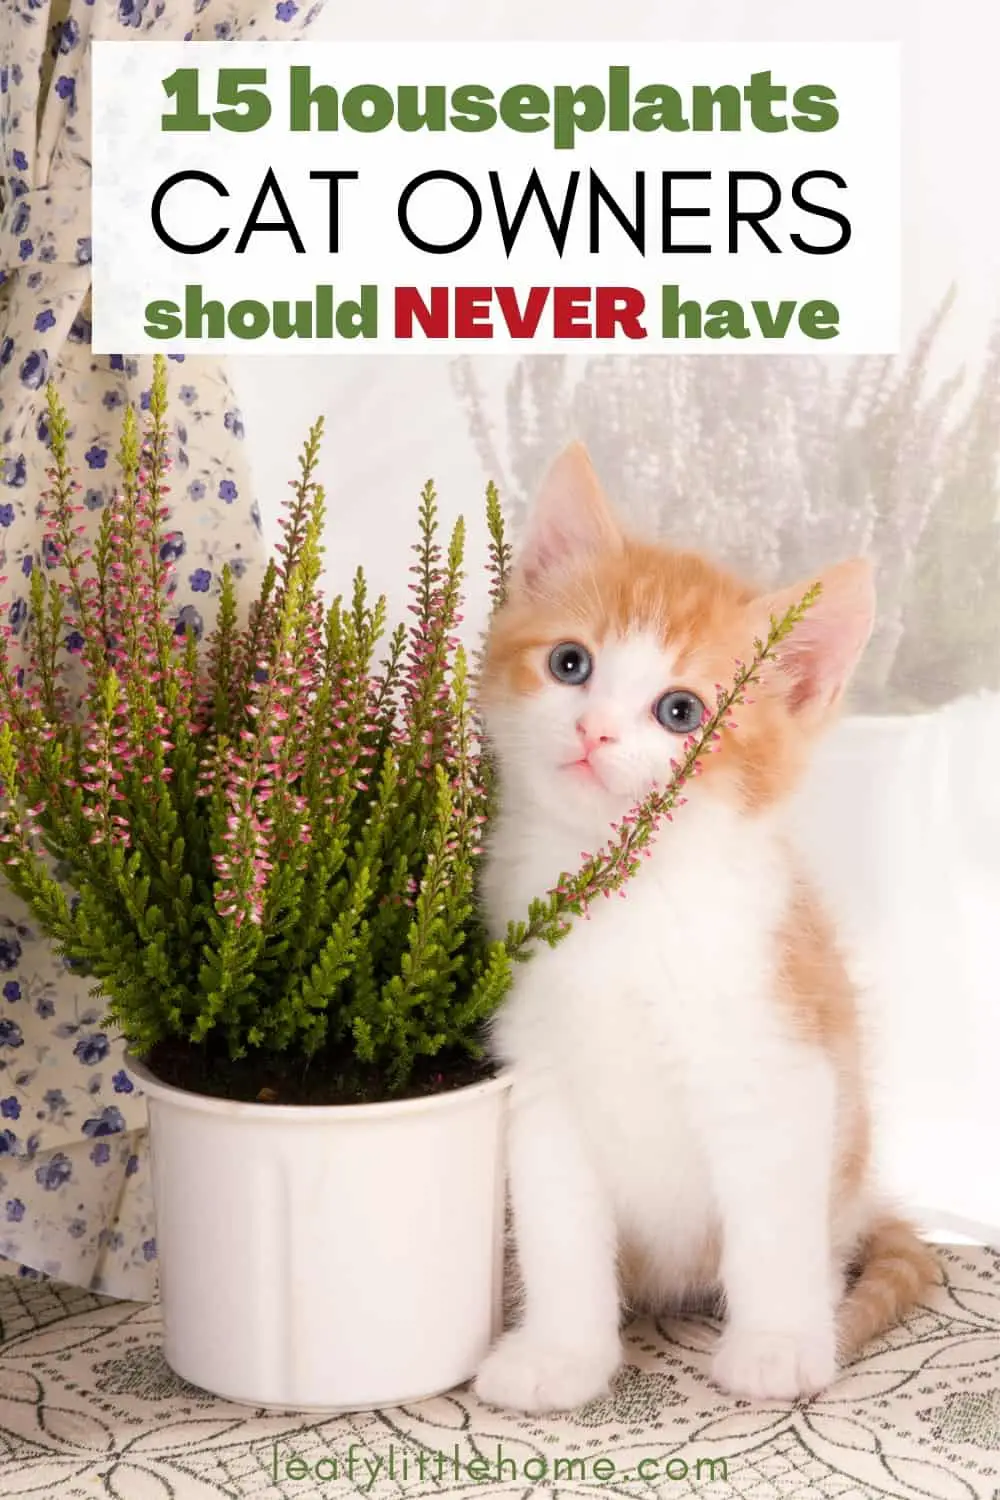 15 Houseplants That Are Toxic to Cats - The Leafy Little Home